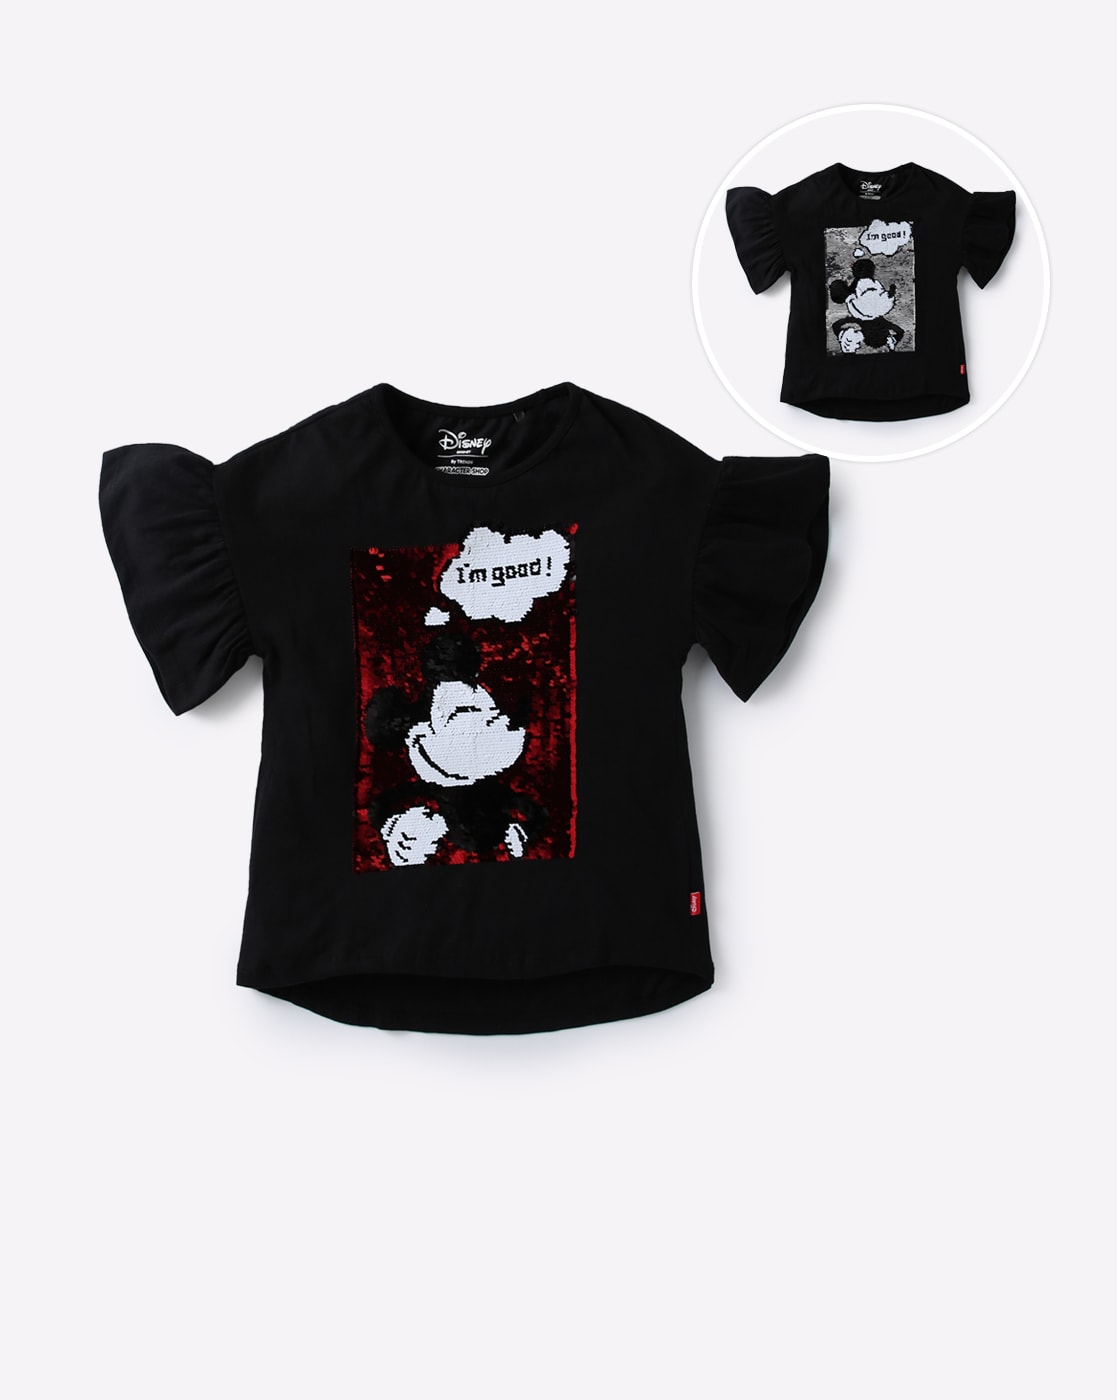 black mickey mouse t shirt